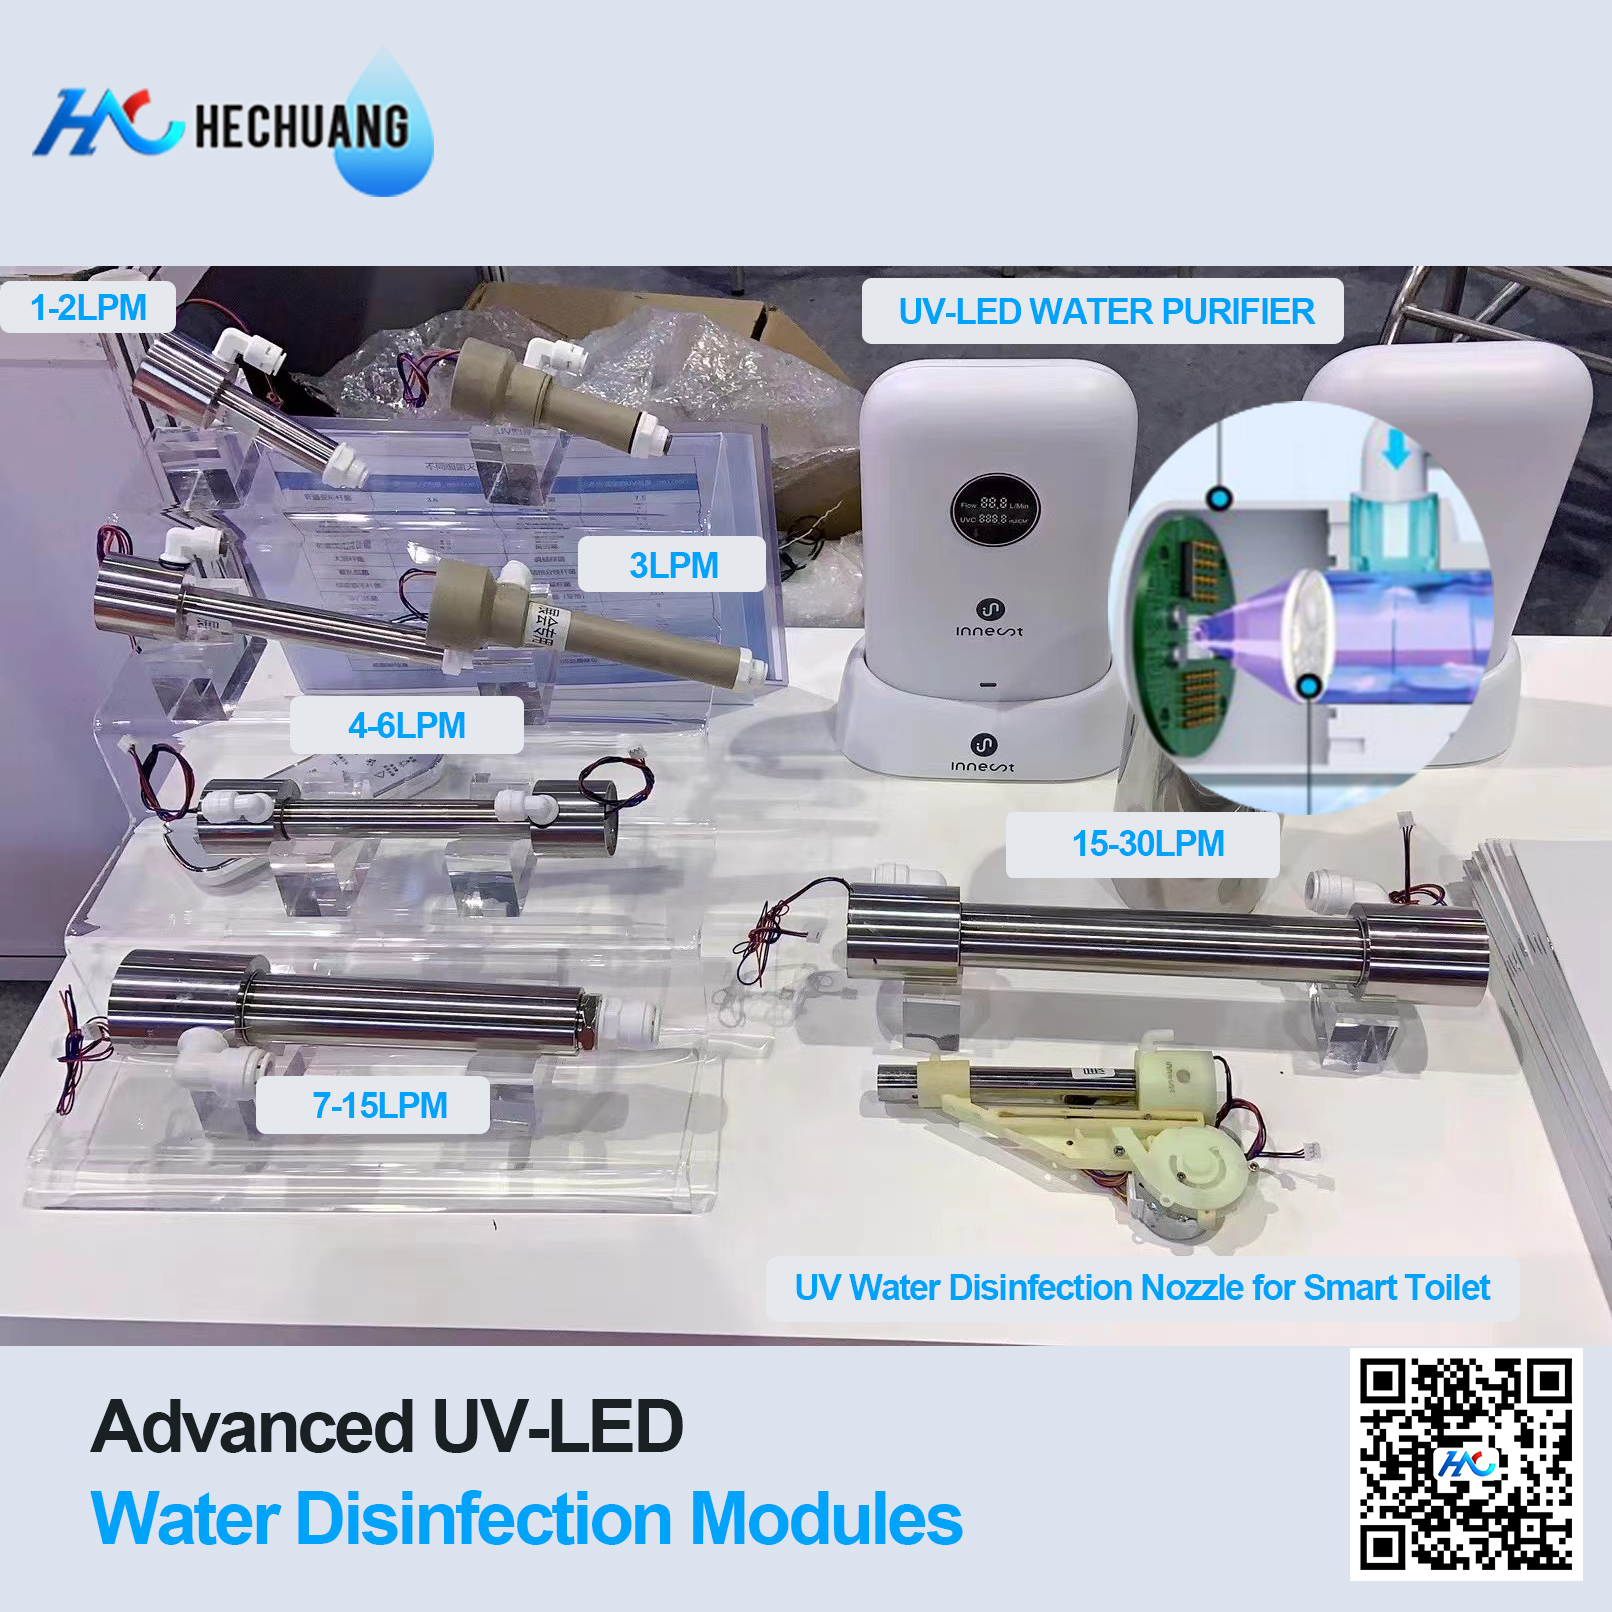 Hechuang Technology’s UVC-LED Water Disinfection Products Were Extremely Popular At Watertech China(